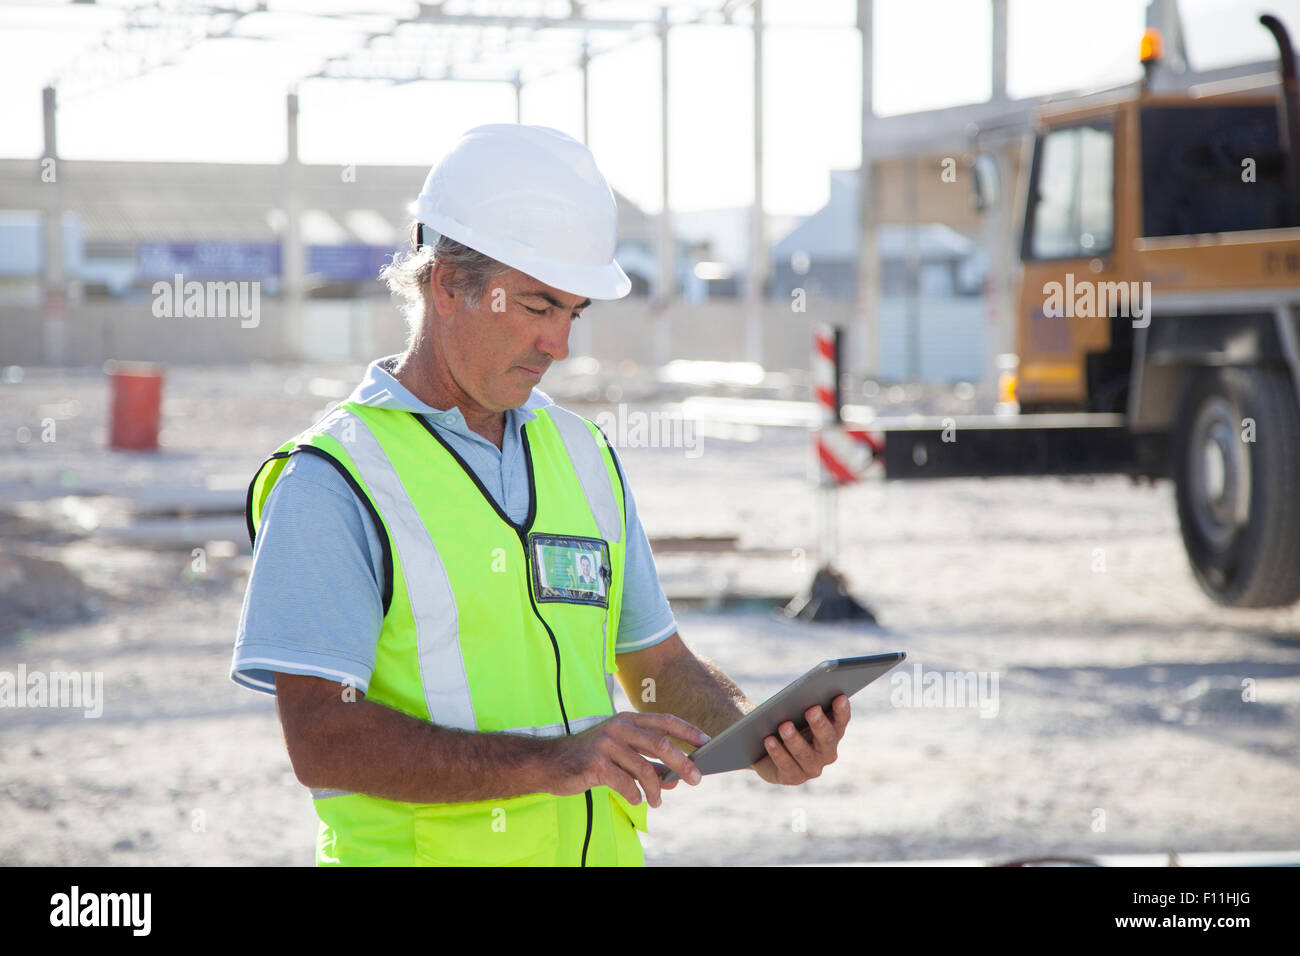 Young construction worker using digital tablet at construction site Banque D'Images